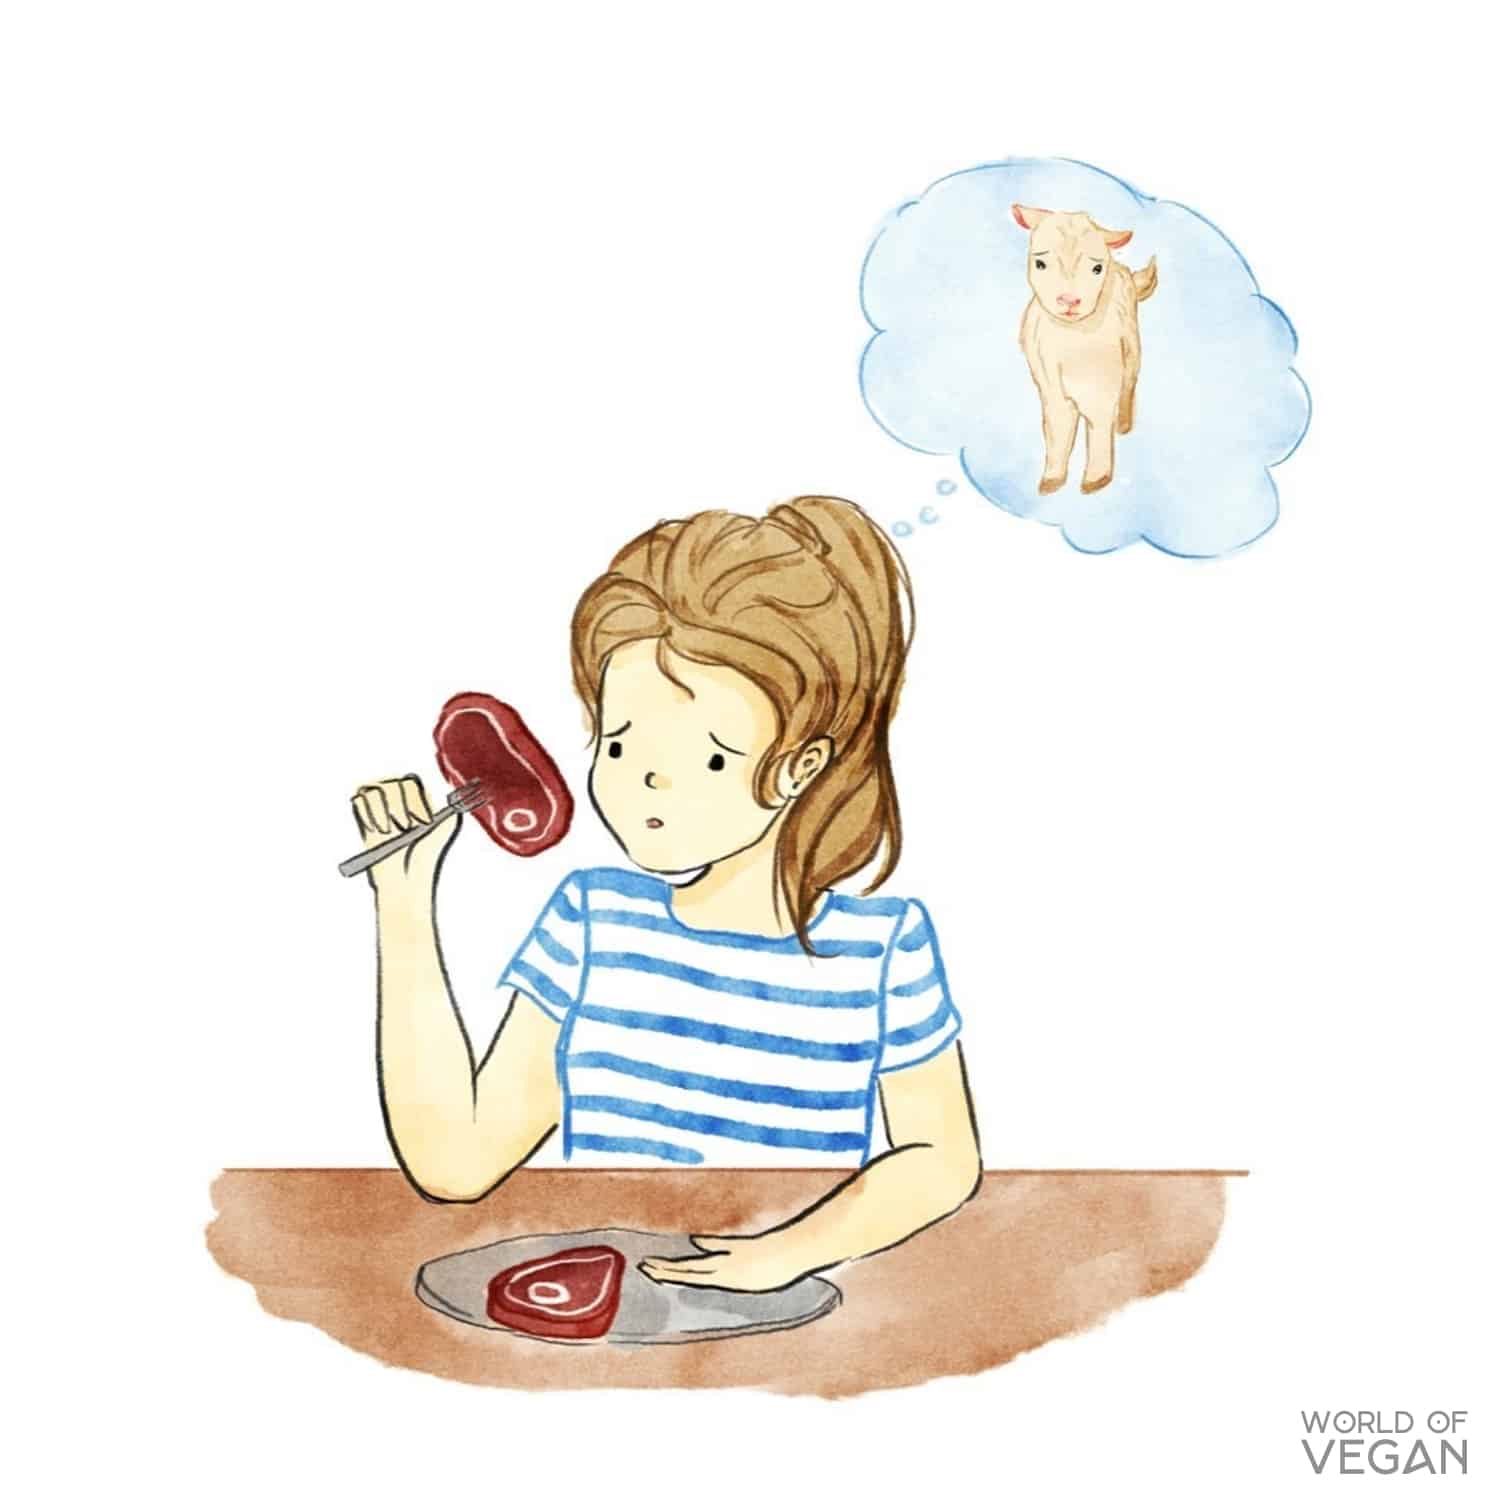 My Vegan Story | Vegan Art showing young girl looking at a slab of meat a an imagining an innocent animal